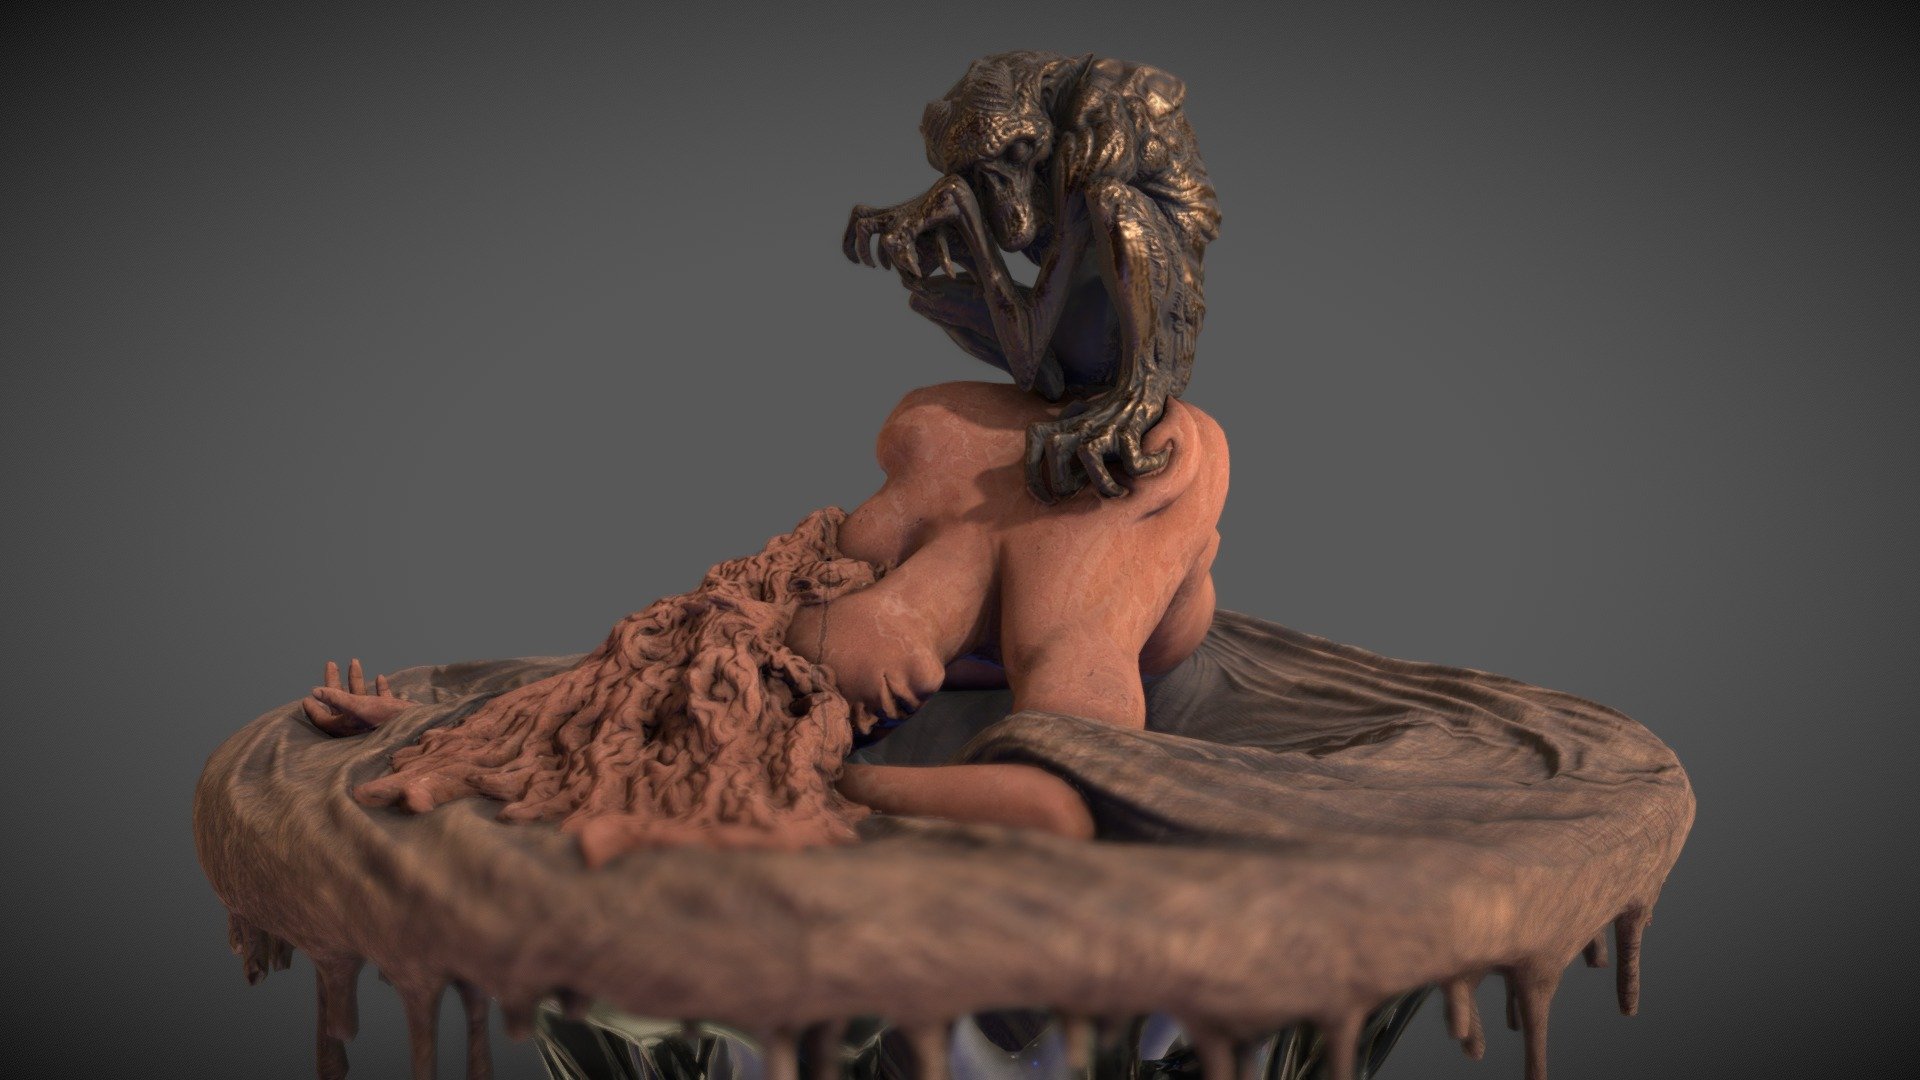 This model is a tribute to the artwork of Henri Fuselli.  It was the horrifying experience of sleep paralysis that prompted this tribute piece.  This sculpture exists in the real world made of Wood, Stone, Copper and Resin 3d model